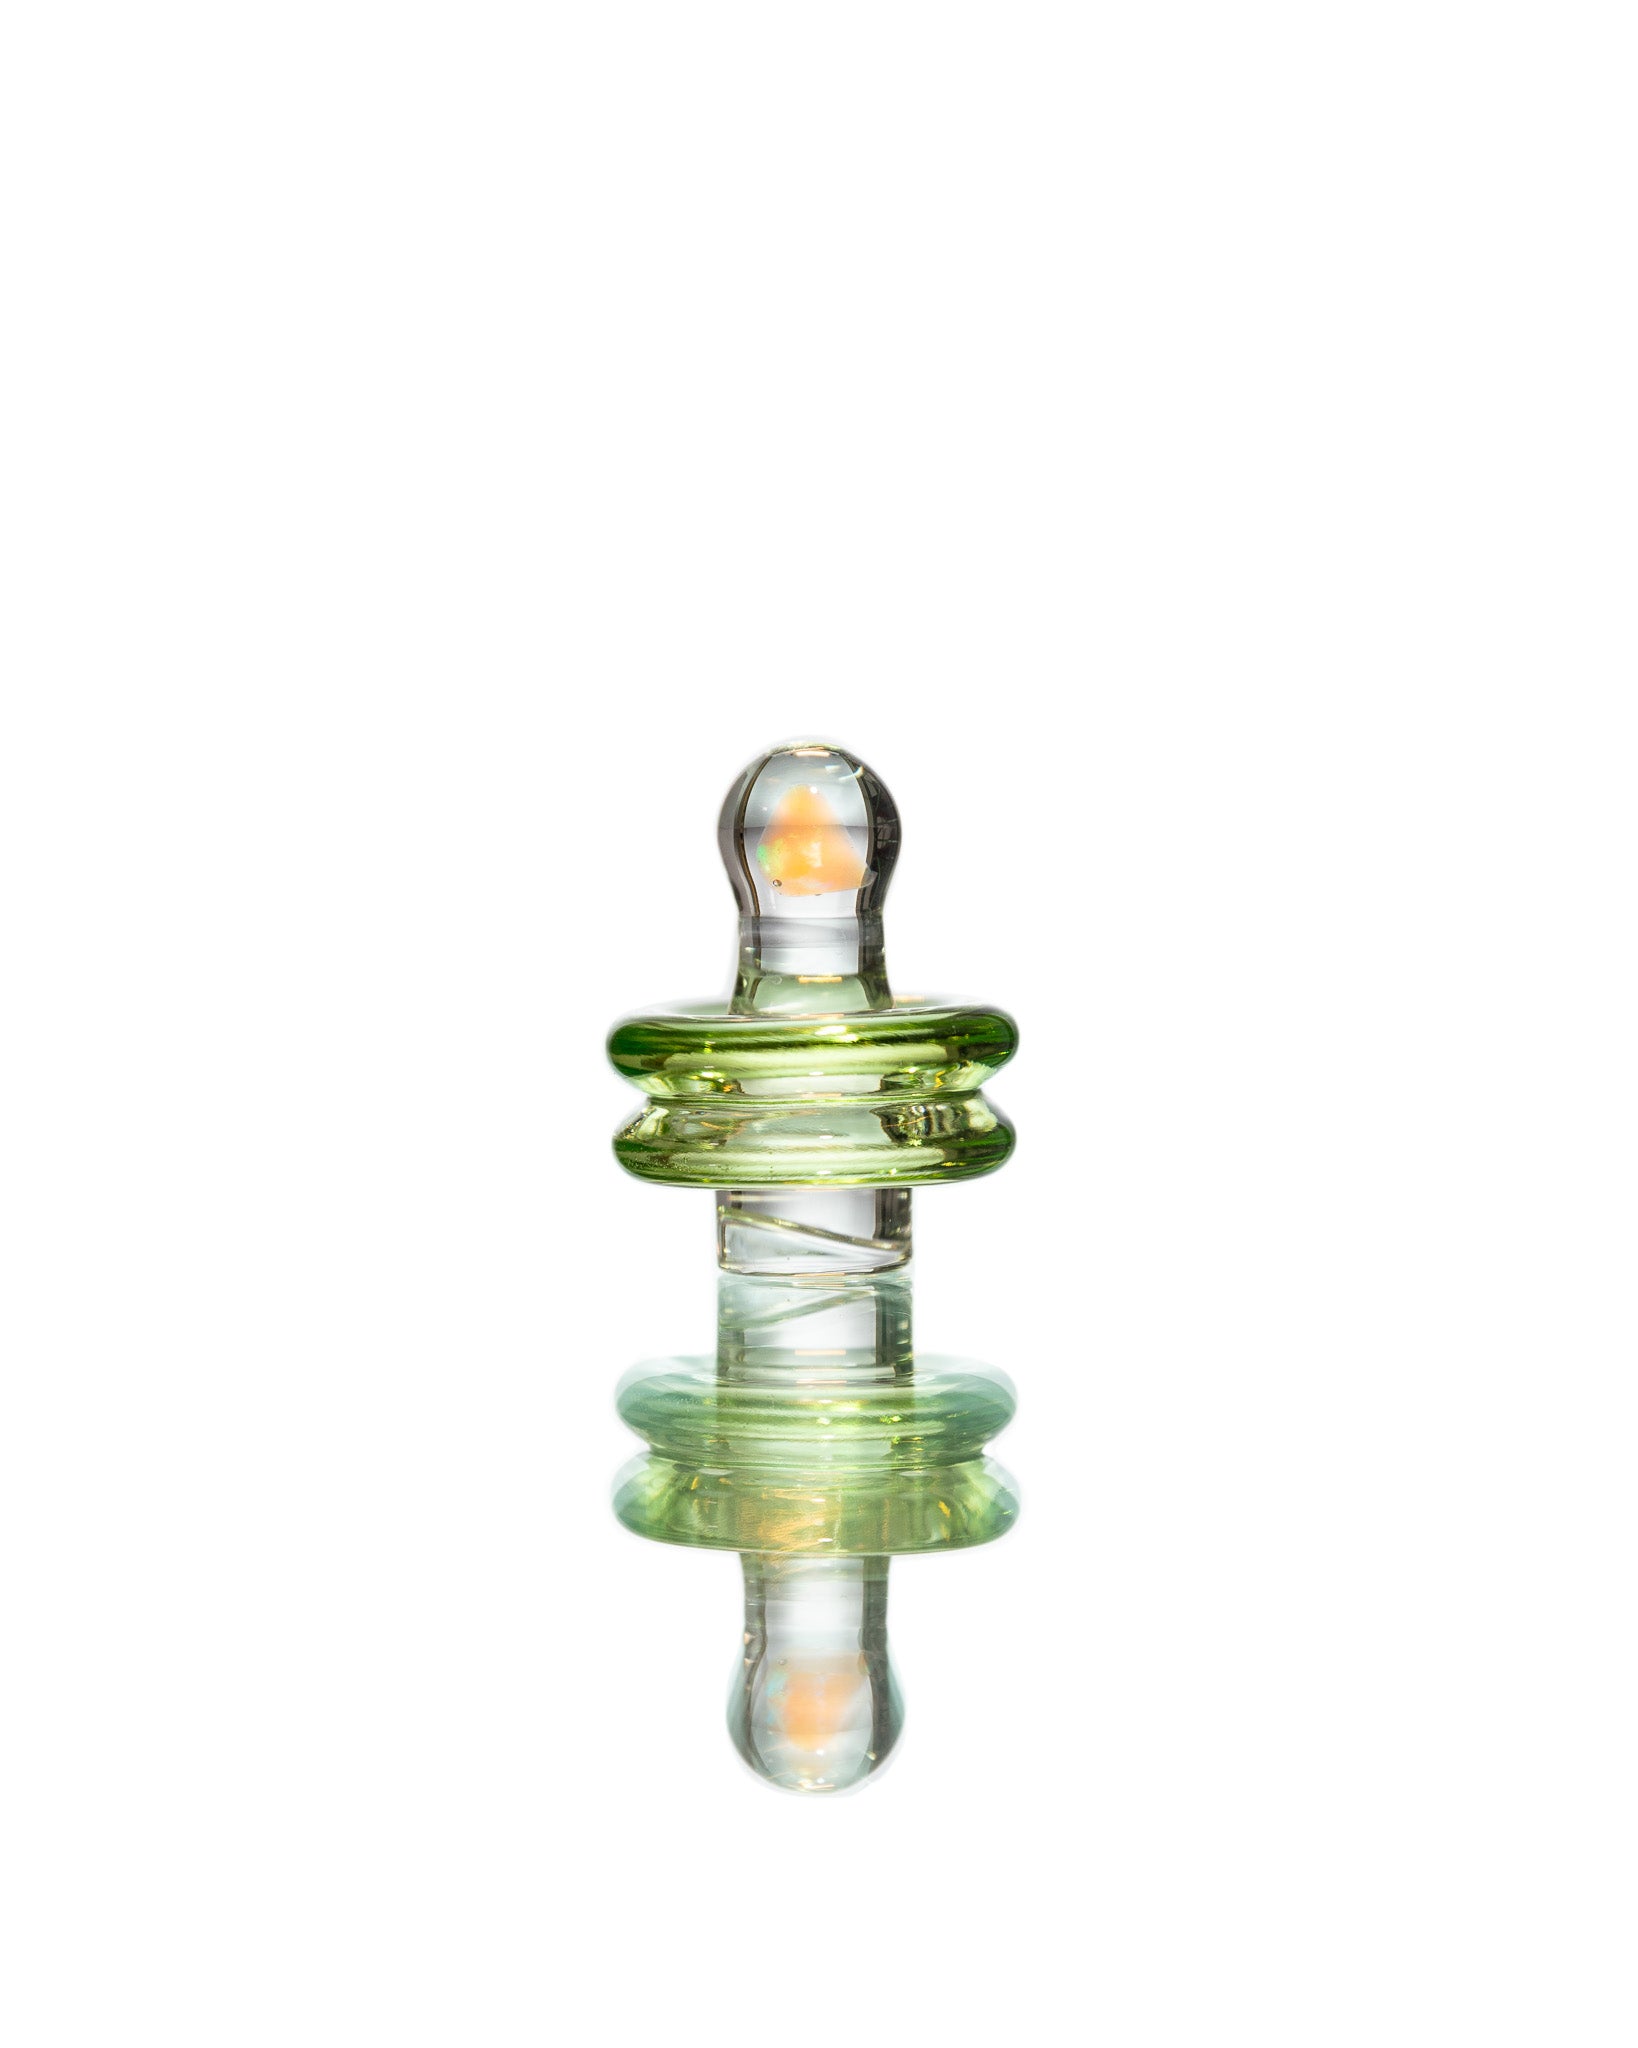 One Trick Pony - "Slyme Green" Opal "Rockulus" Spinner Cap